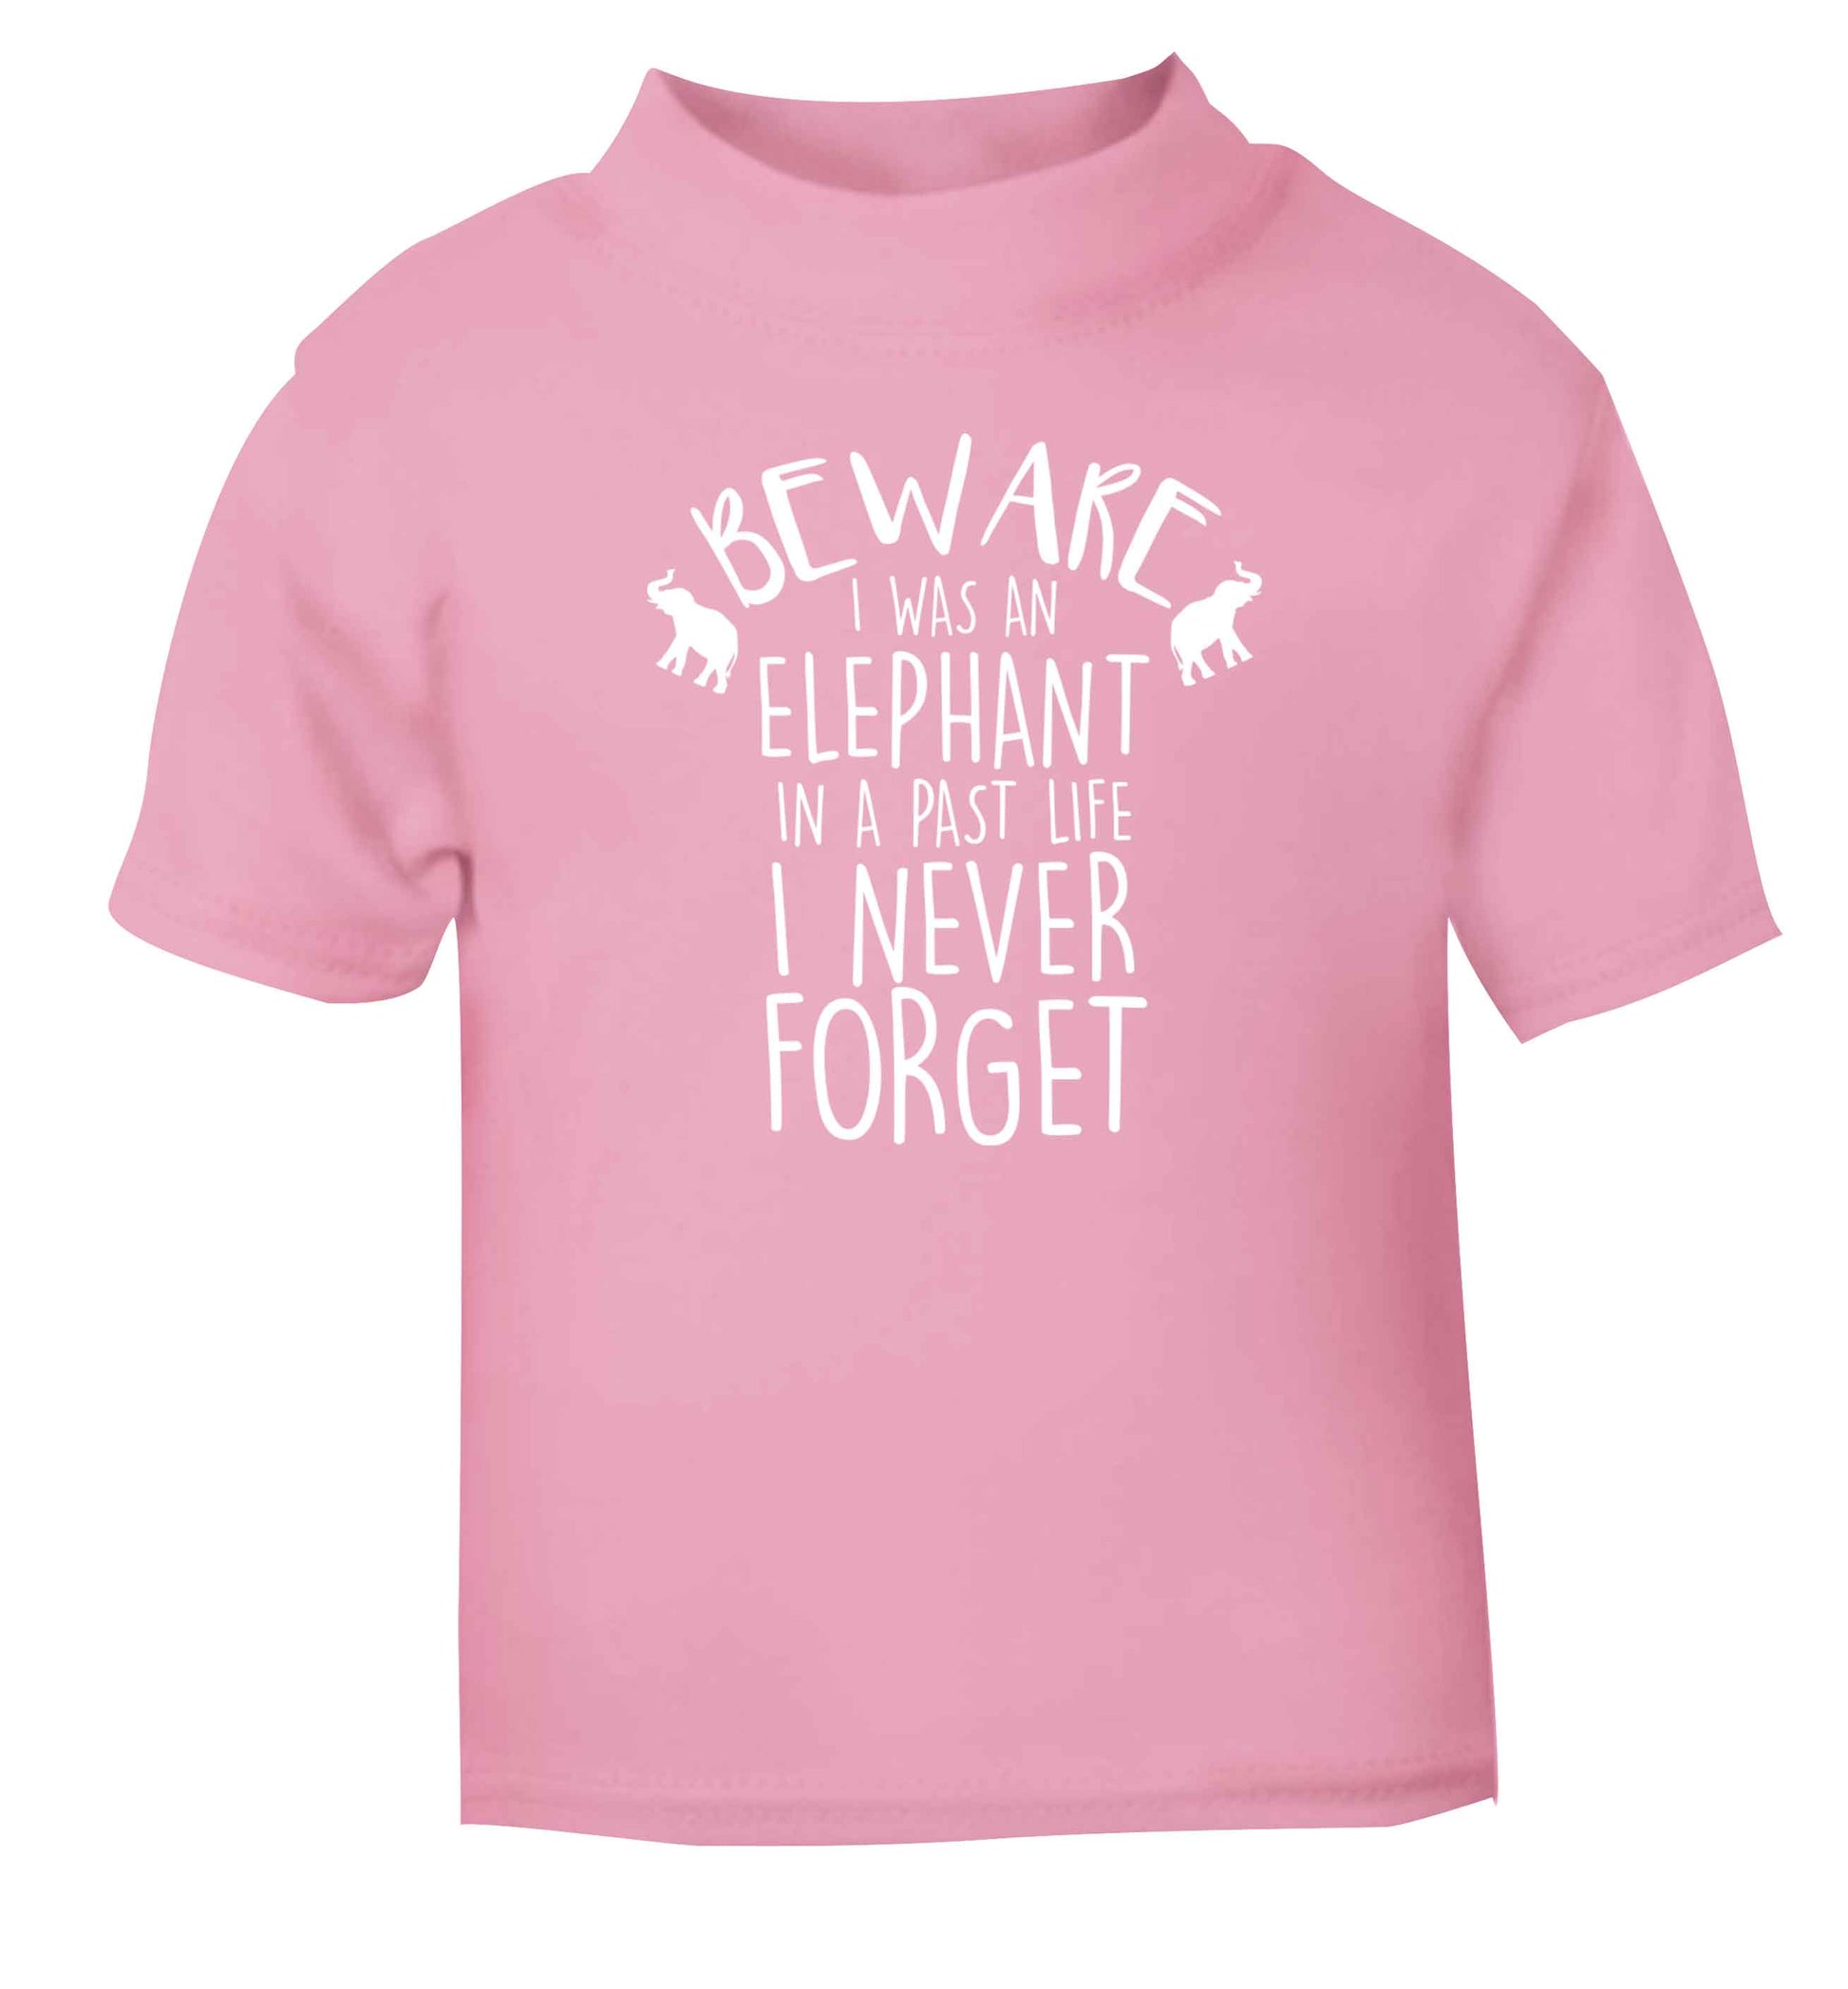 Beware I was an elephant in my past life I never forget light pink Baby Toddler Tshirt 2 Years